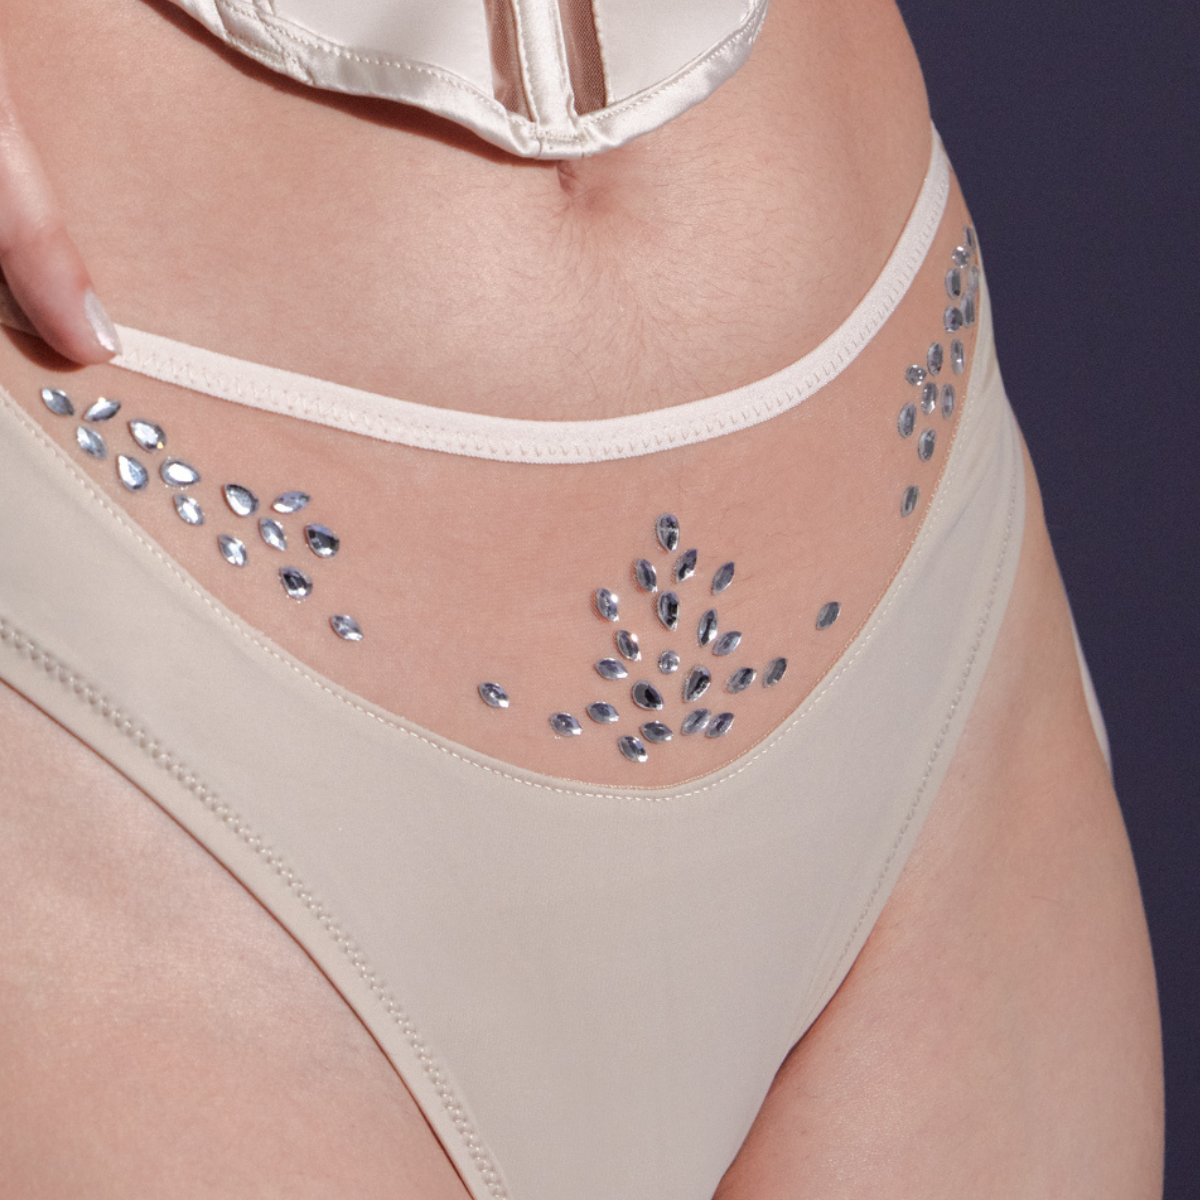 Dripping in Jewels Thong - Available in Multiple Nudes